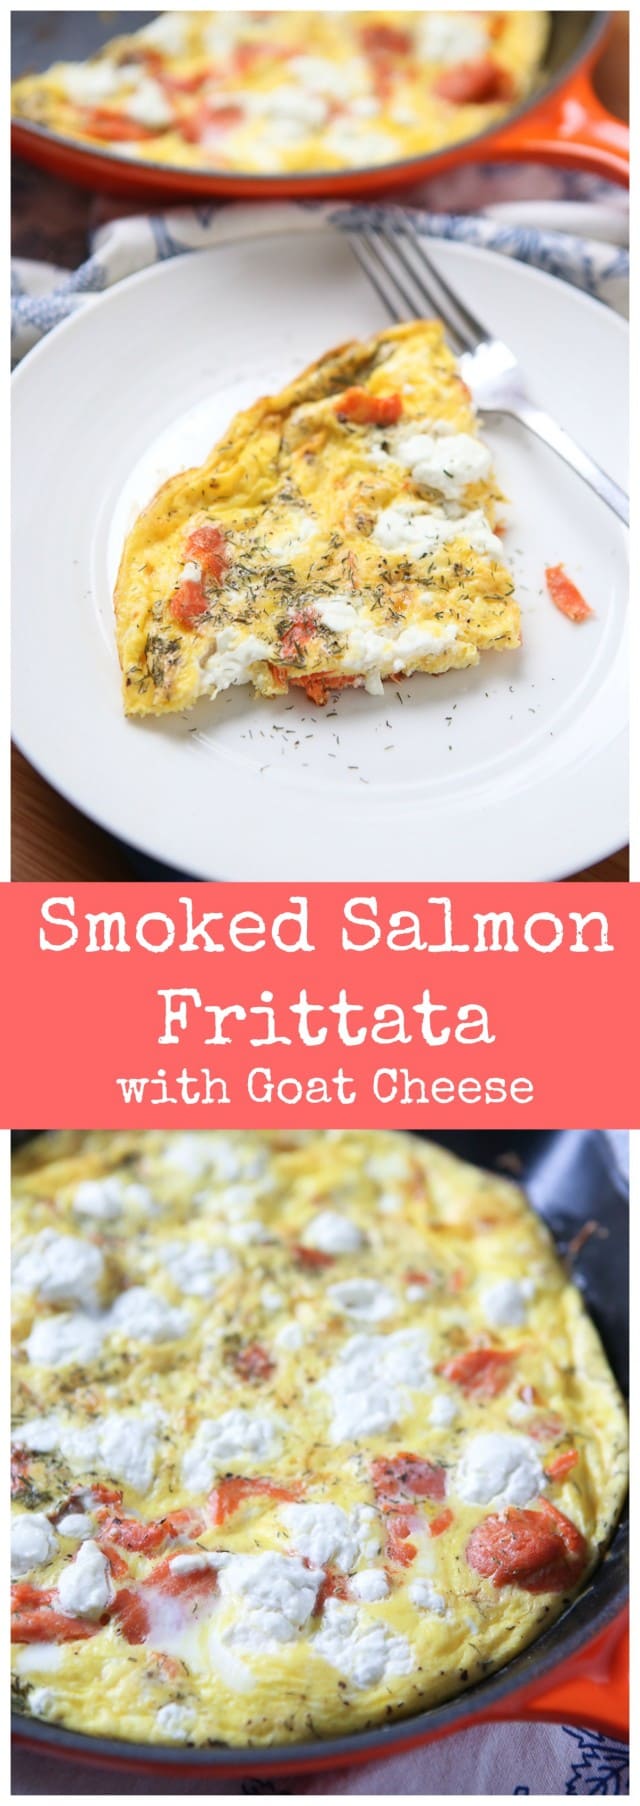 Inspired by a smoked salmon quiche, this smoked salmon frittata with goat cheese and dill is lighter and so easy to make!